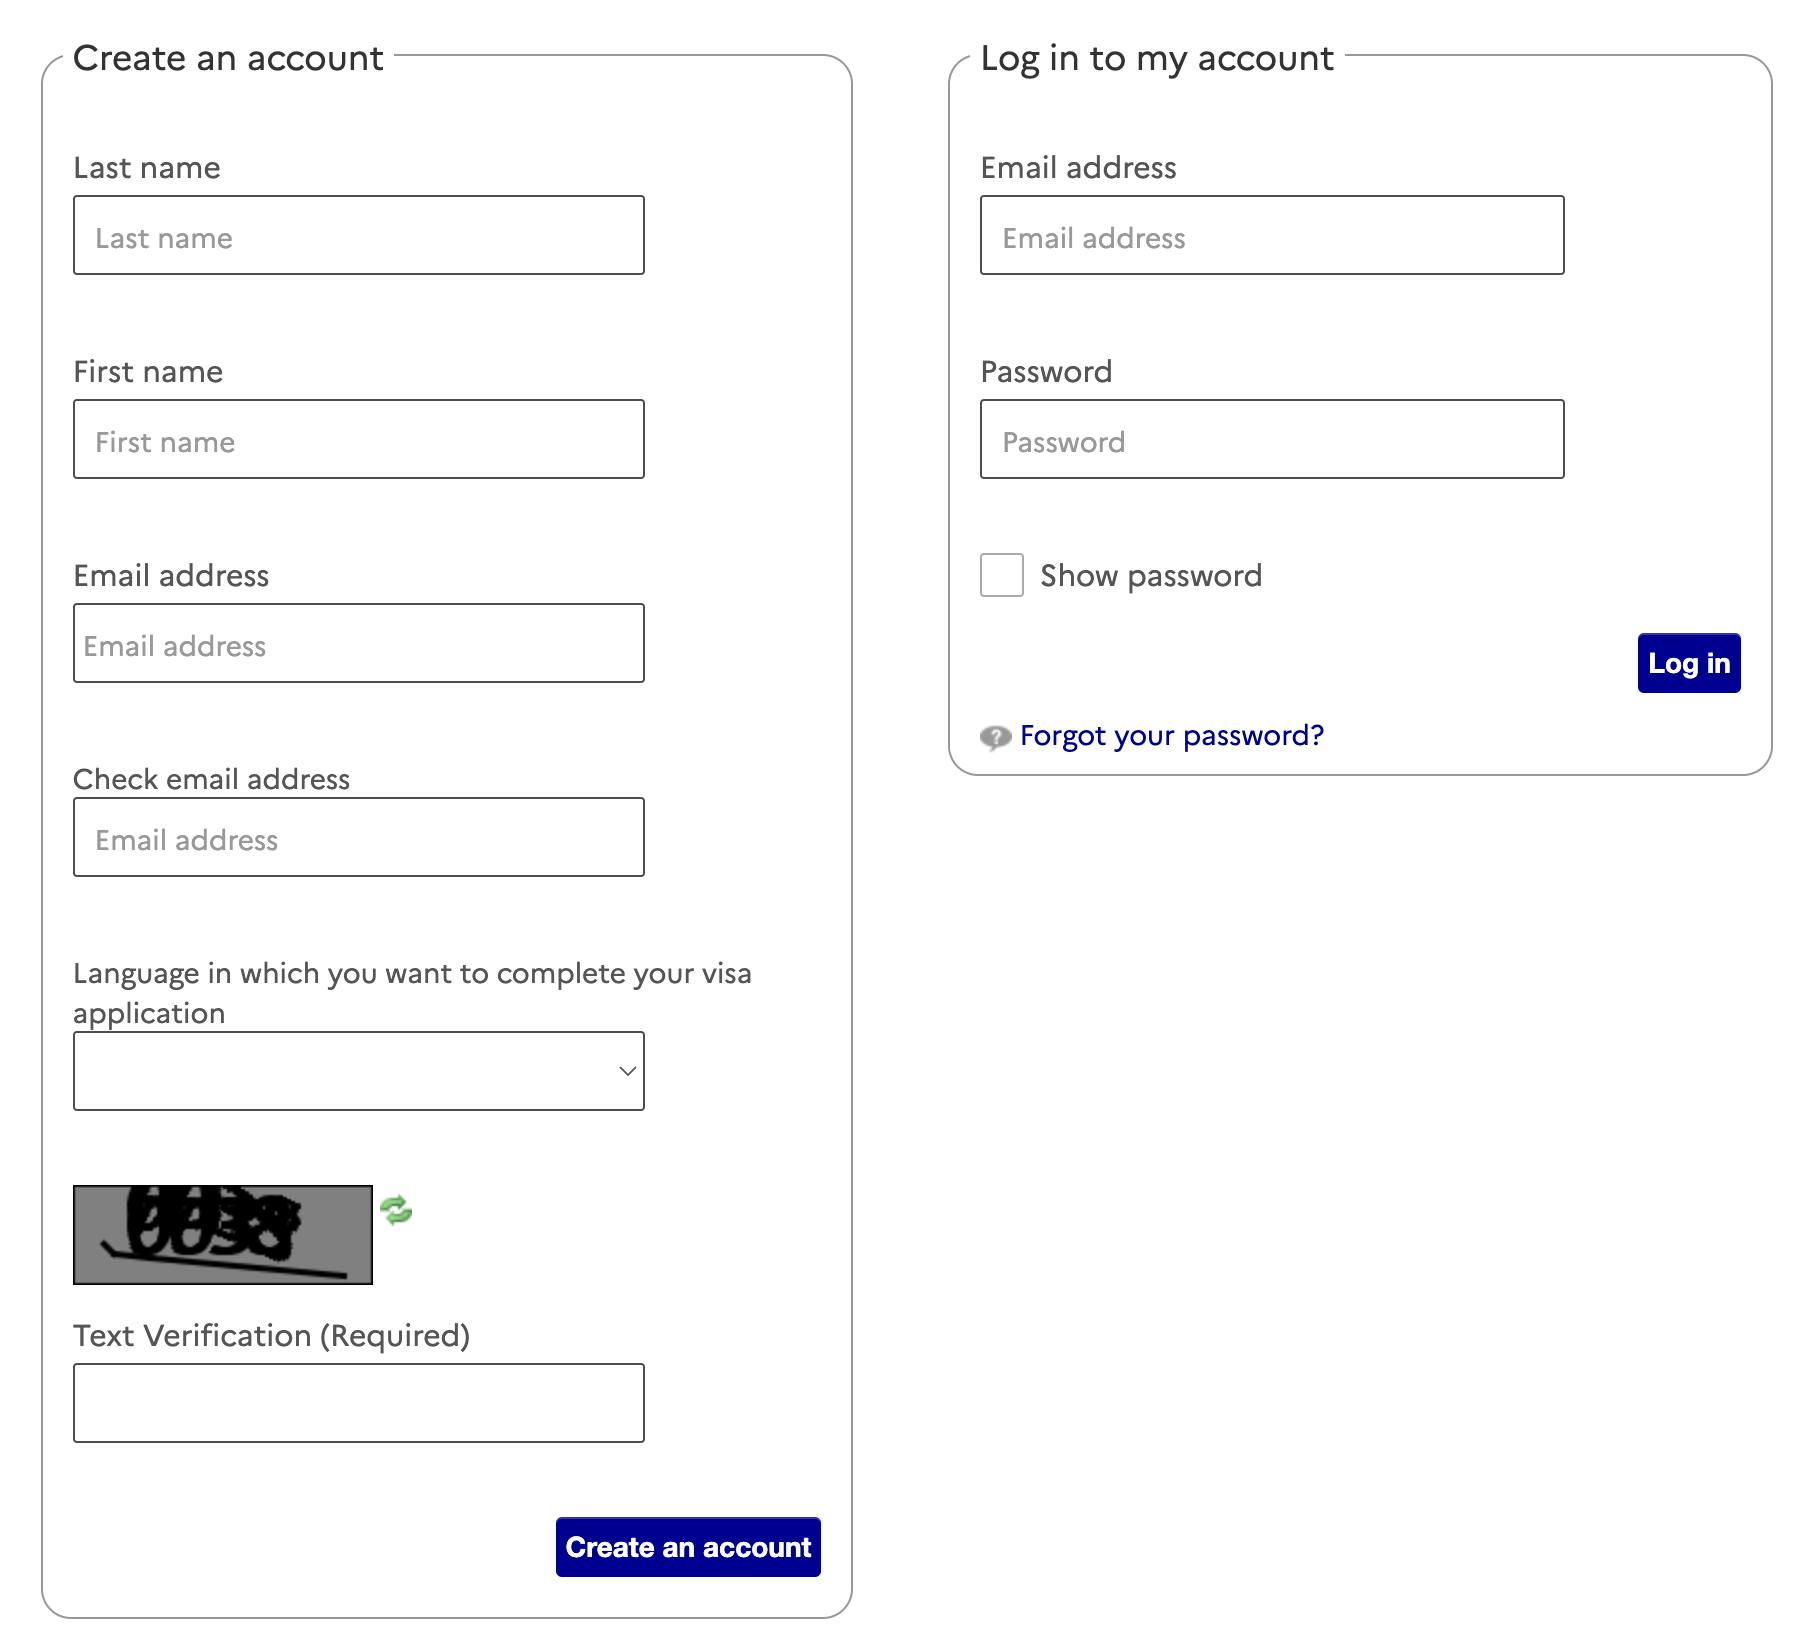 Create or Log in to your account